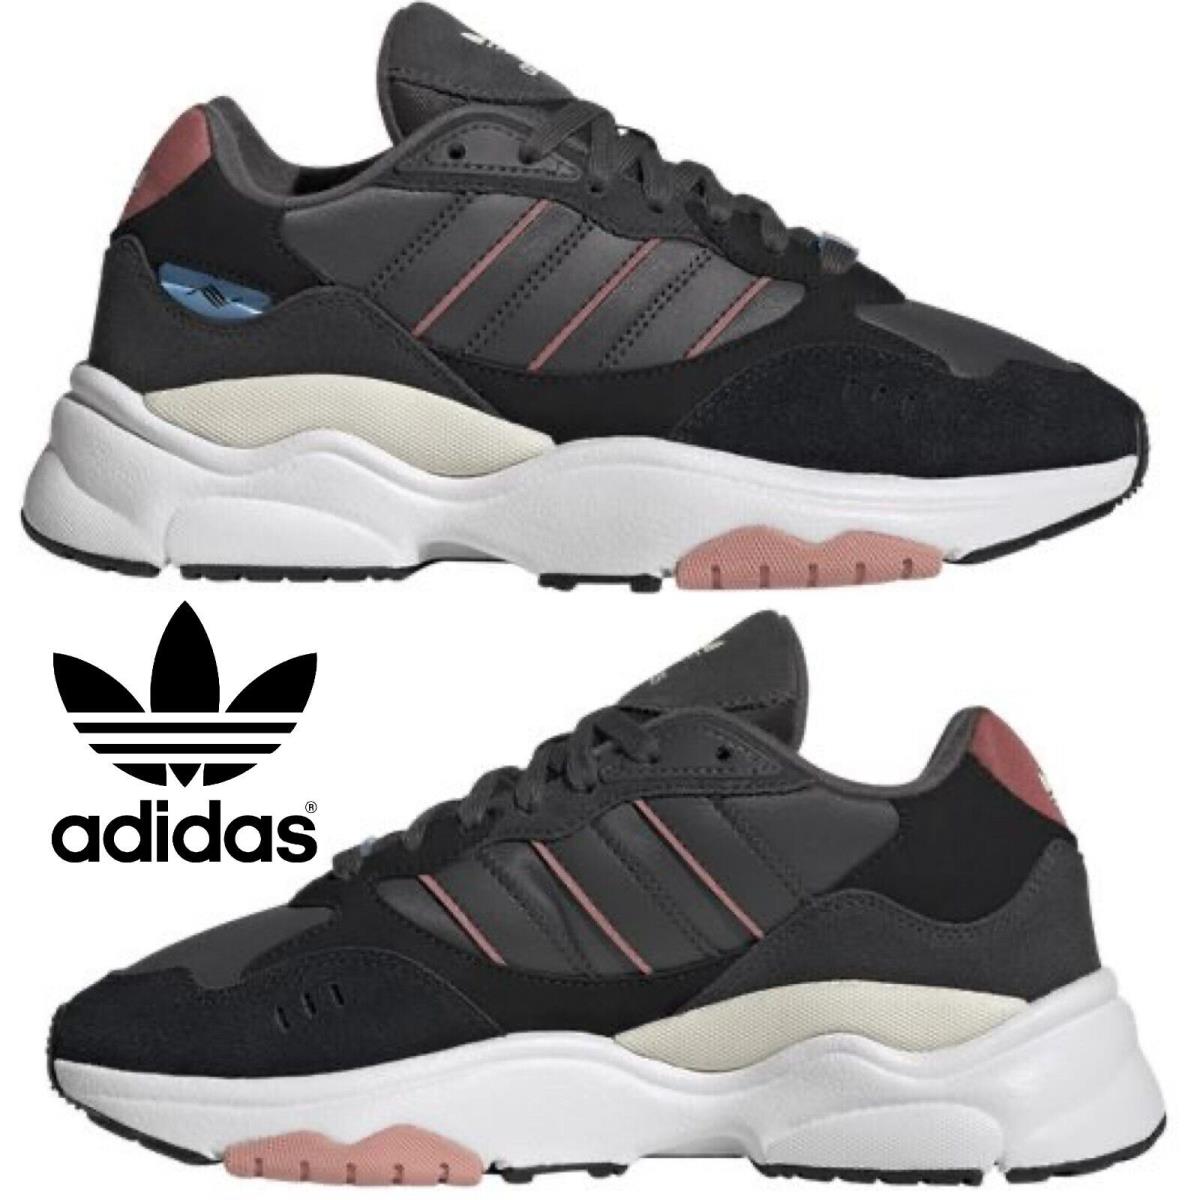 Adidas Retropy Mystique Running Shoes Women s Sneakers Casual Shoes Sport